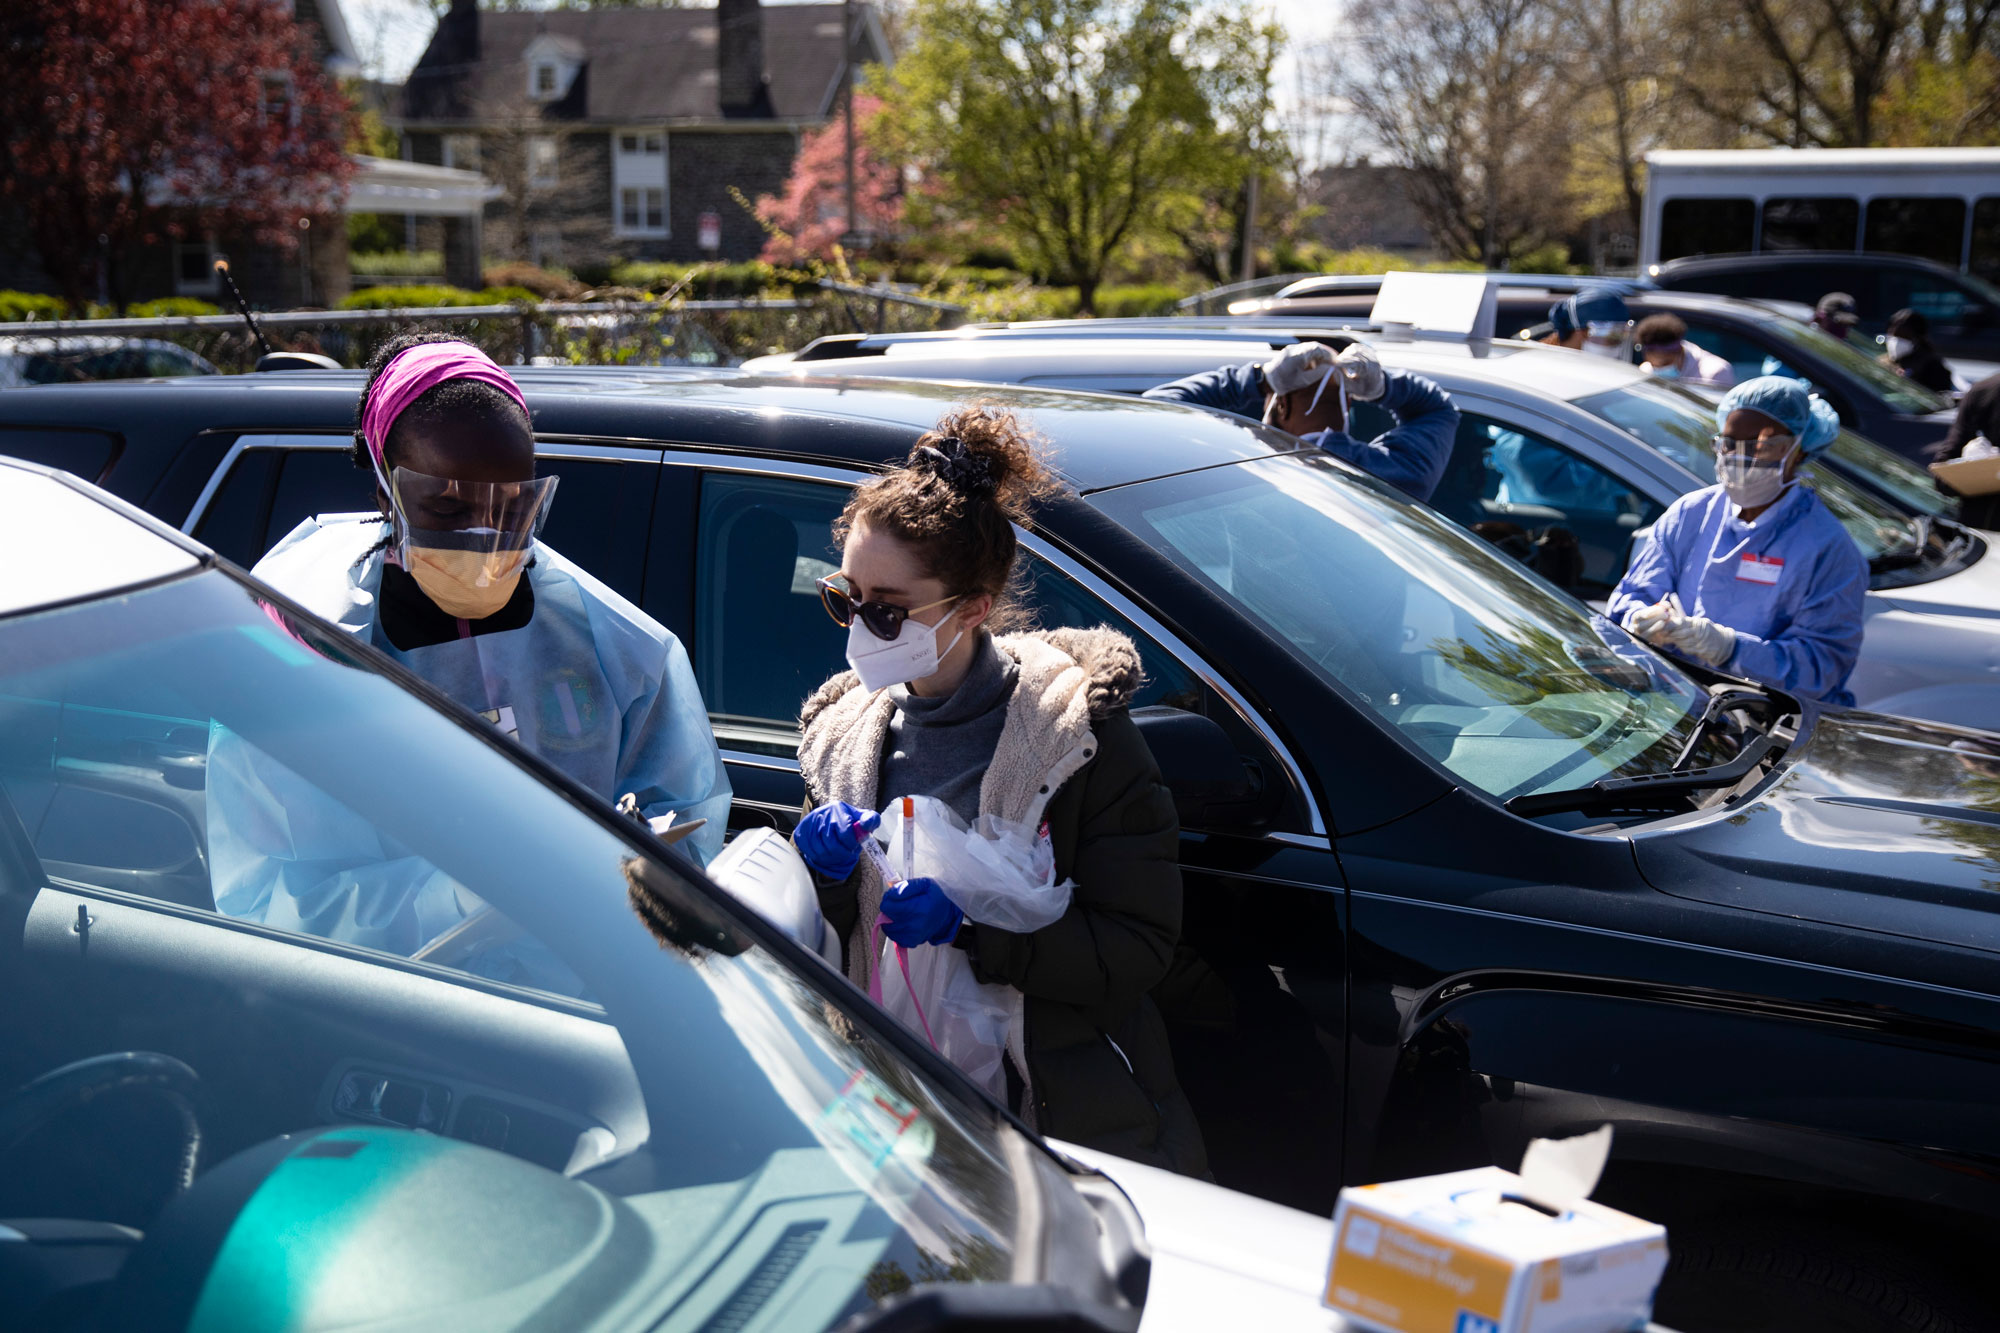 Dr. Ala Stanford, left, assisted by medical student Tal Lee, prepares to administer a COVID-19 swab test on a person in the parking lot of Pinn Memorial Baptist Church in Philadelphia, on April 22.